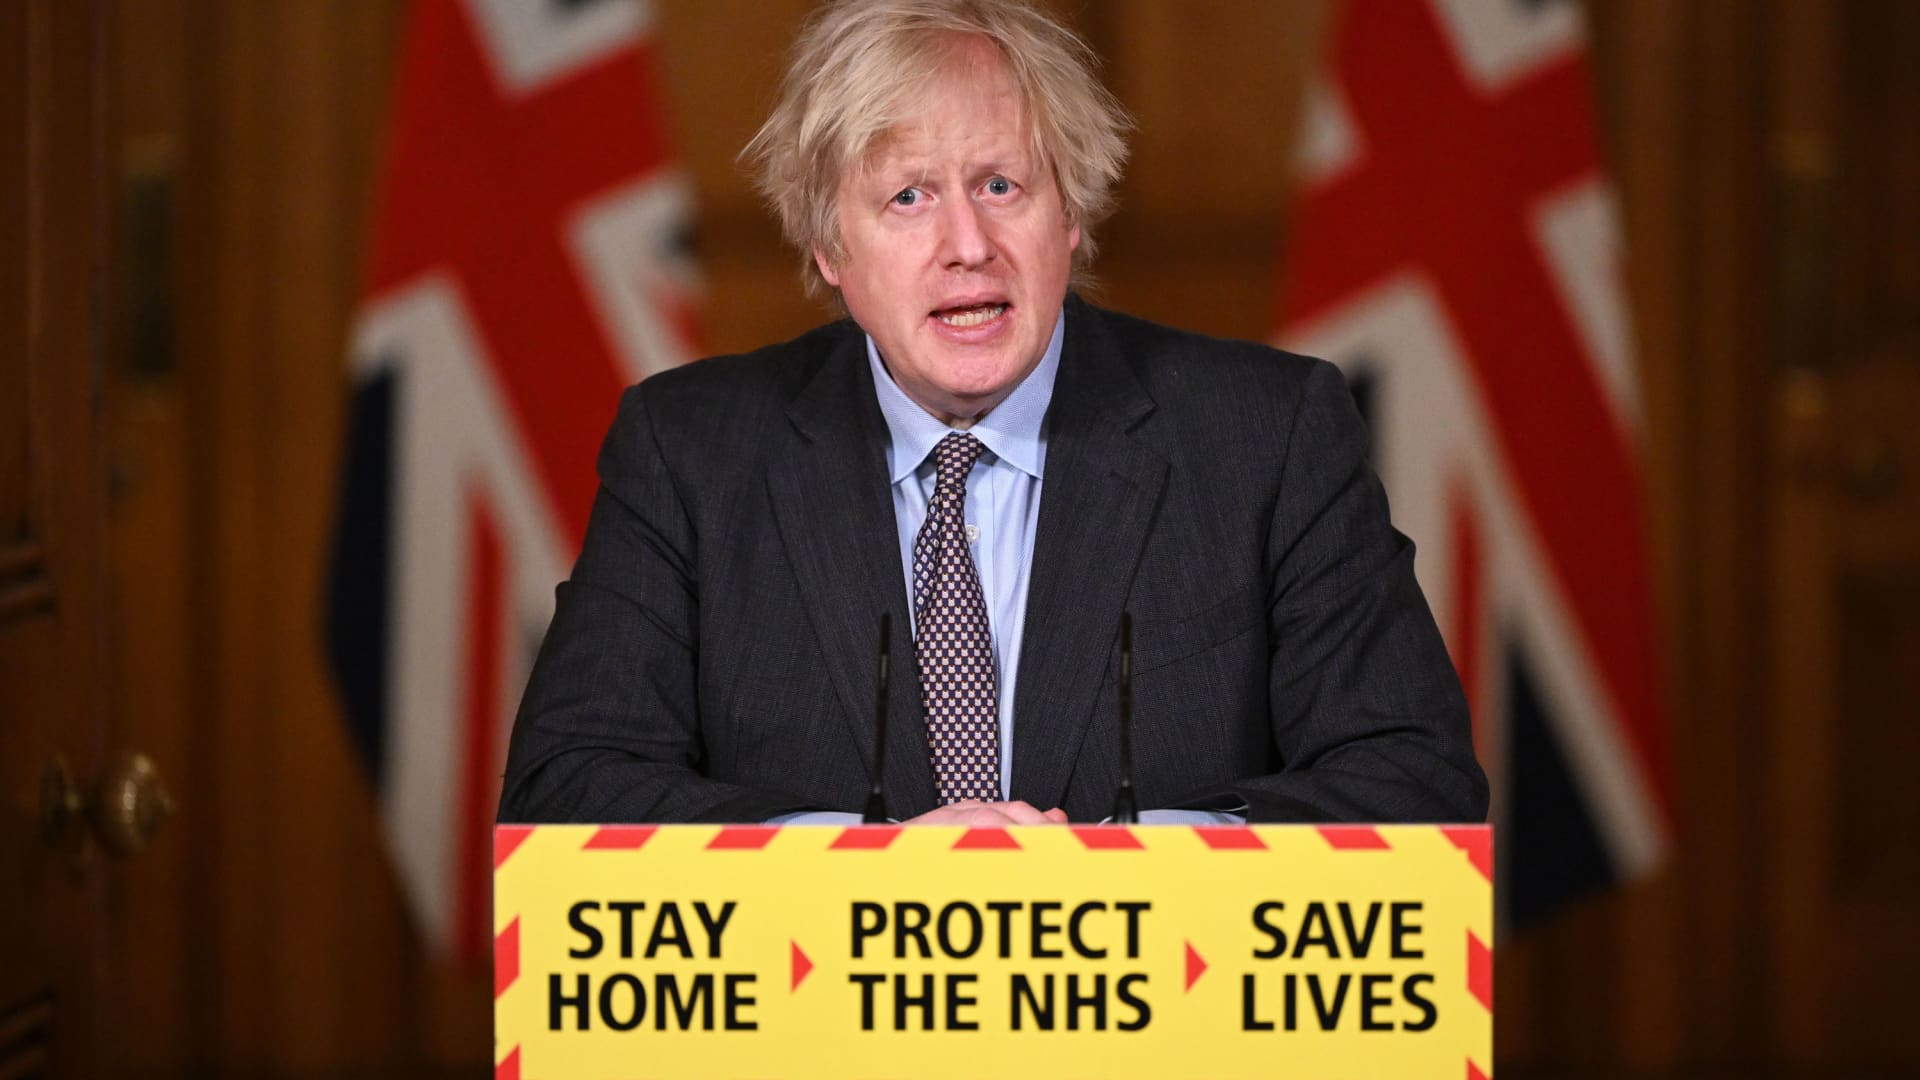 British Prime Minister Boris Johnson speaks during a televised press conference at 10 Downing Street on February 22, 2021 in London, England.